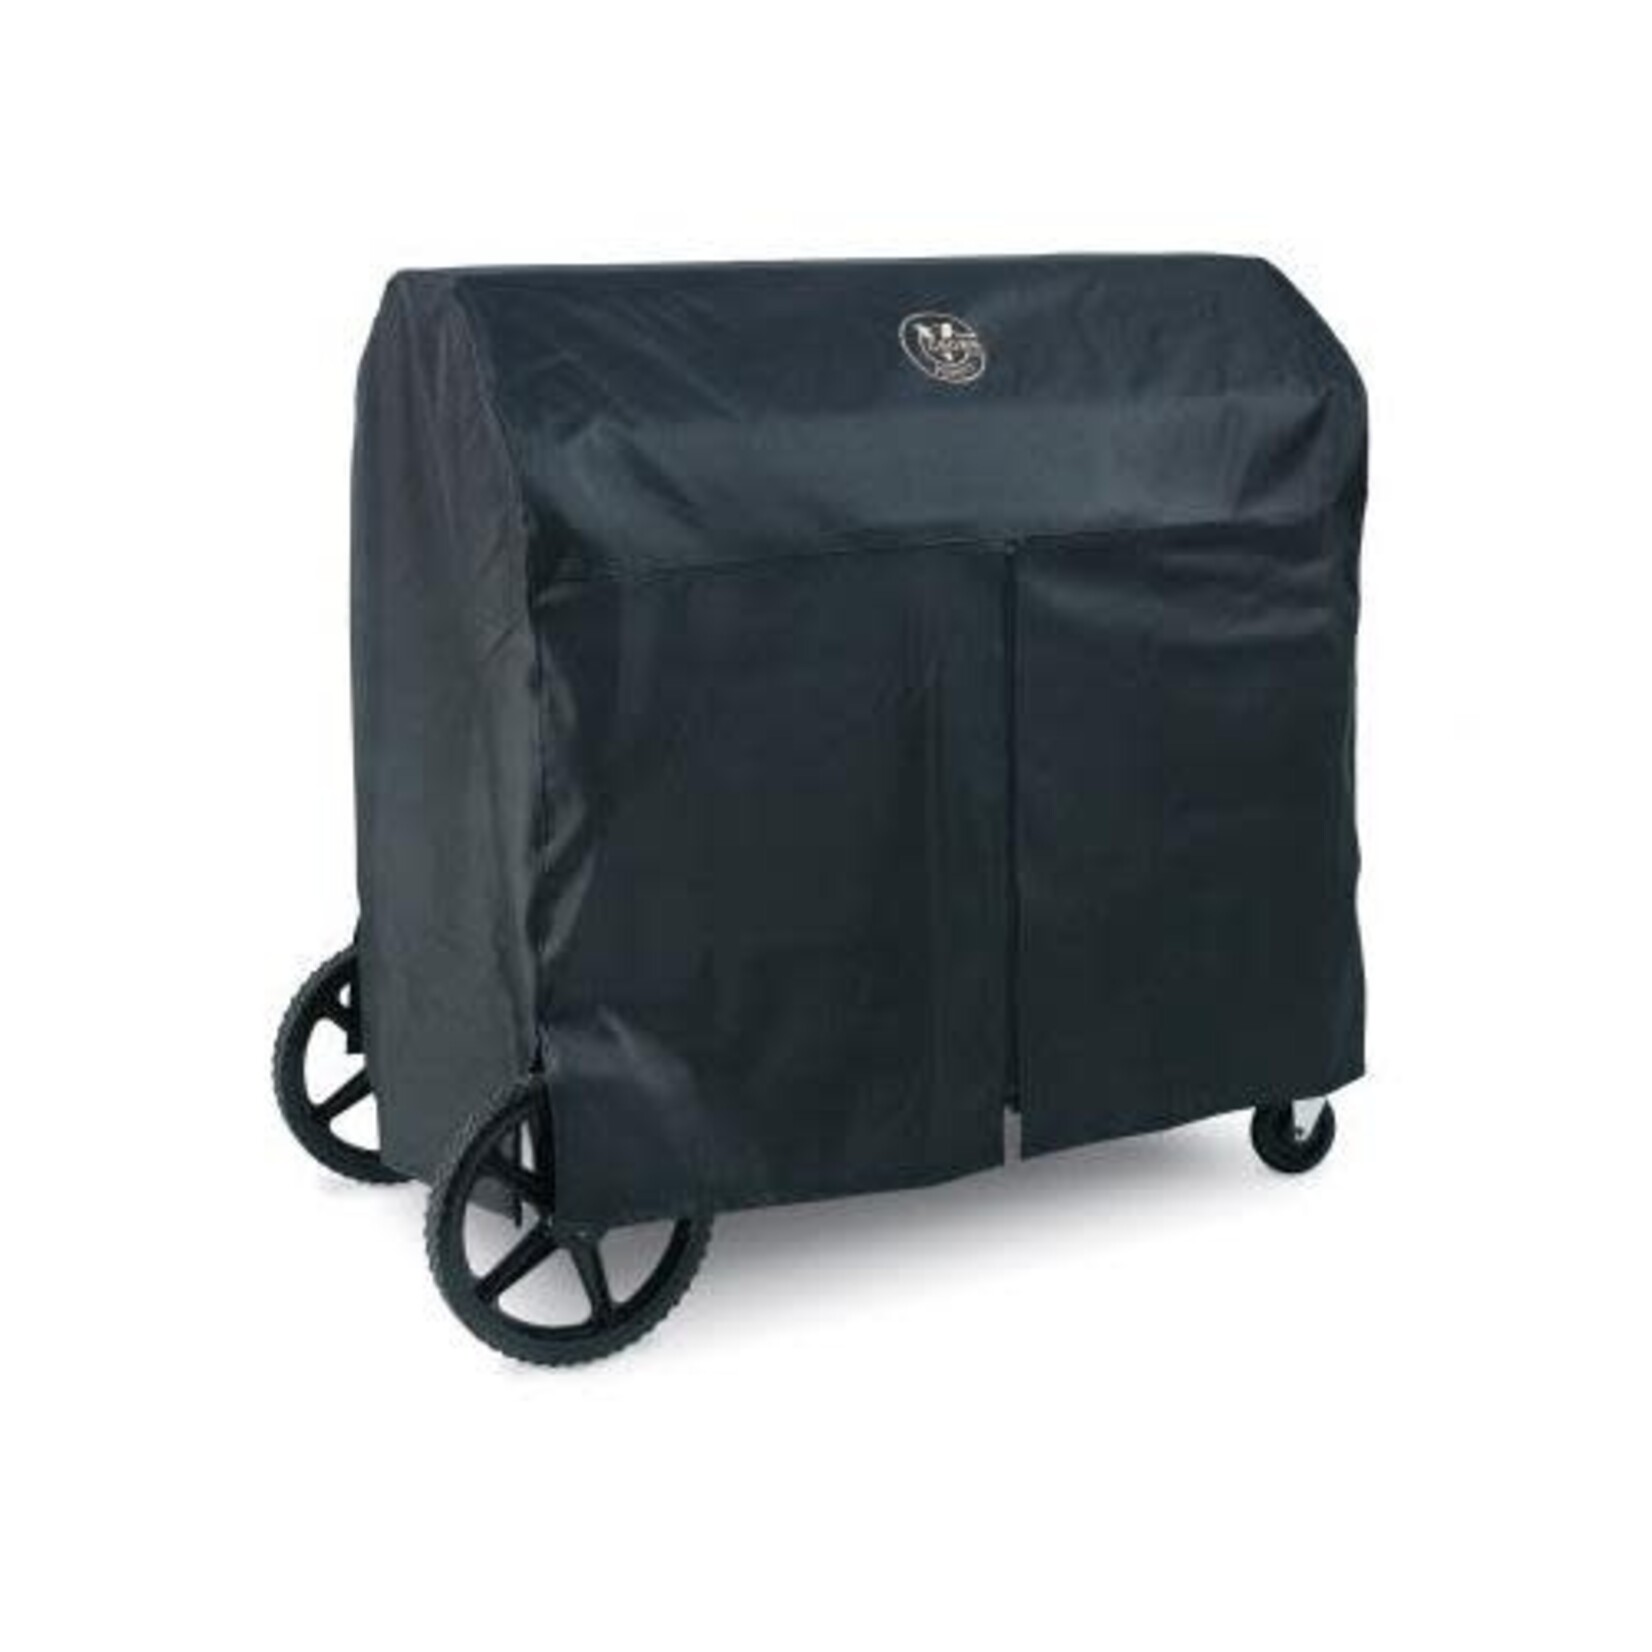 Crown Verity BBQ Cover for all 48" grills with roll dome option